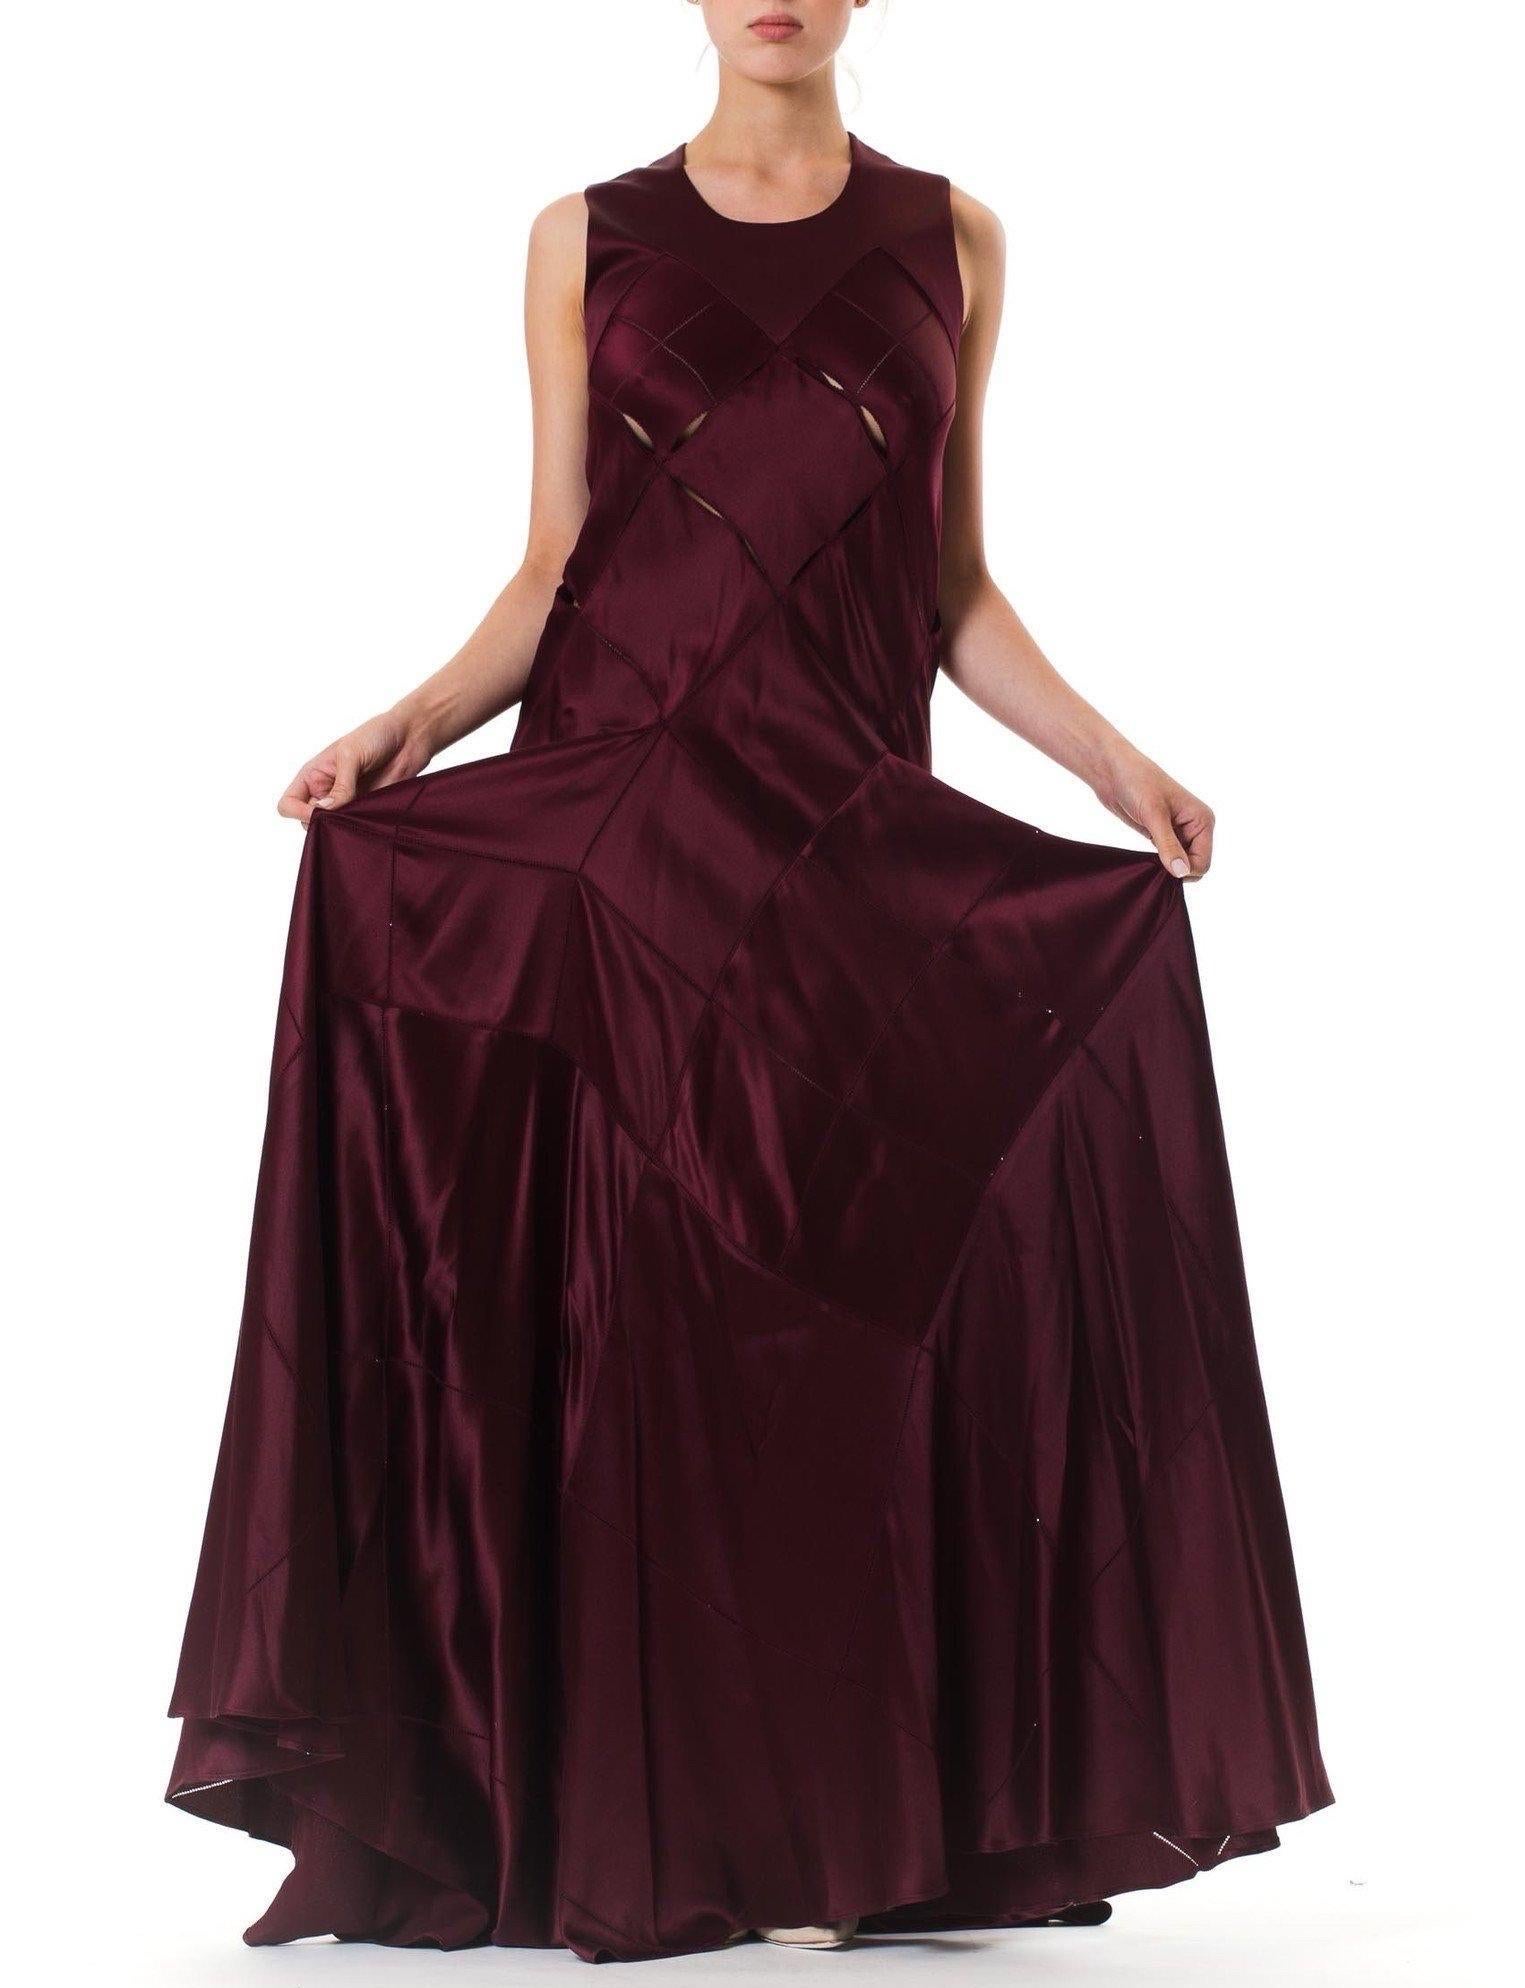 2000S CALVIN KLEIN Burgundy Bias Cut Silk Crepe Back Satin Patchwork Cut-Out Gown With Very Full Skirt